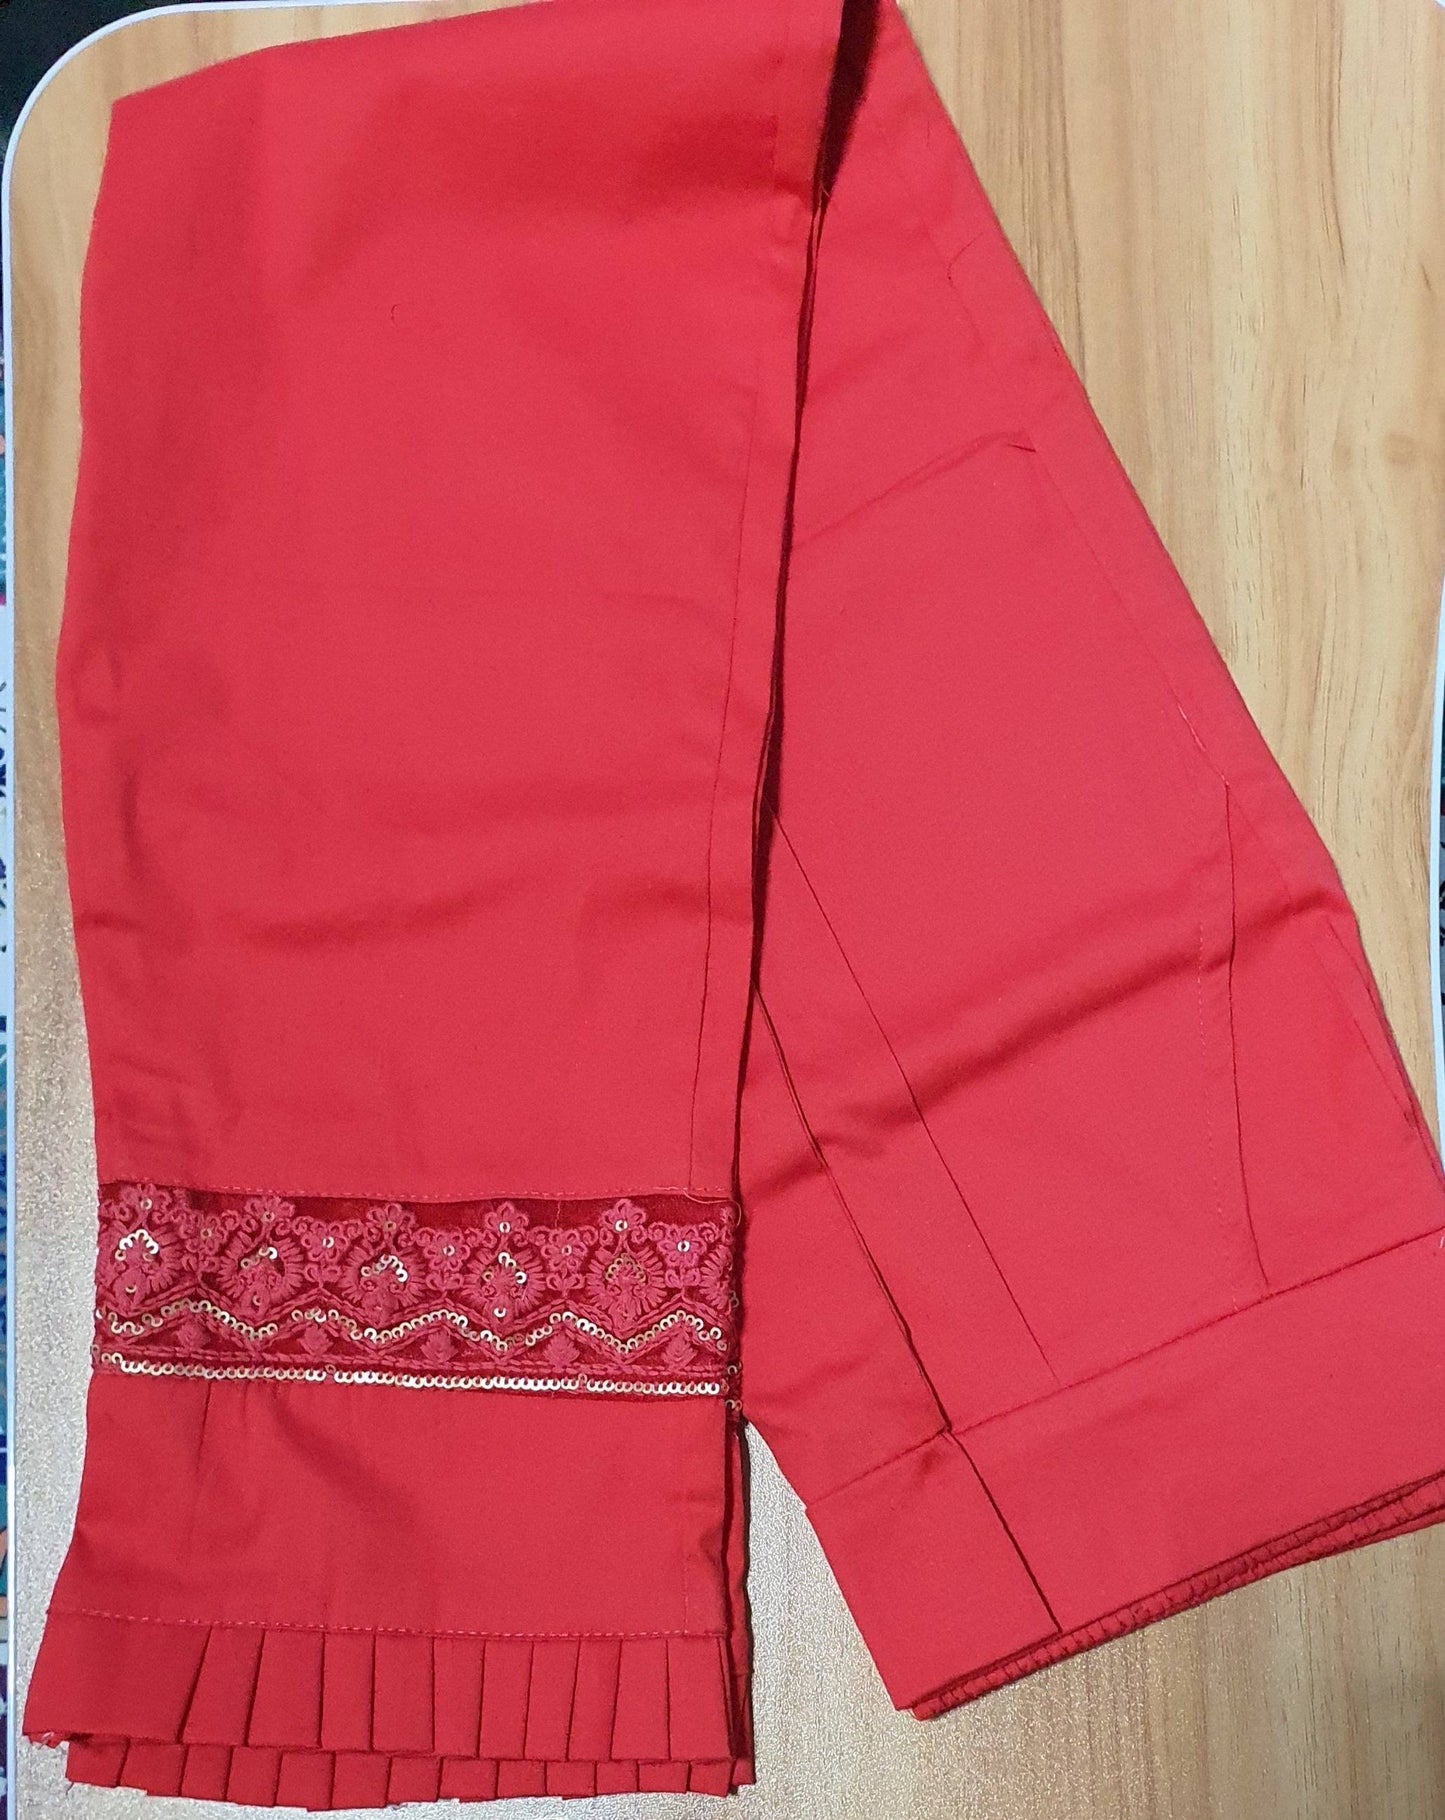 Designer Lace Embroidered Cotton Lycra Pants in 5 colors Cotton Lycra Pants Shopindiapparels.com Gajar Red 